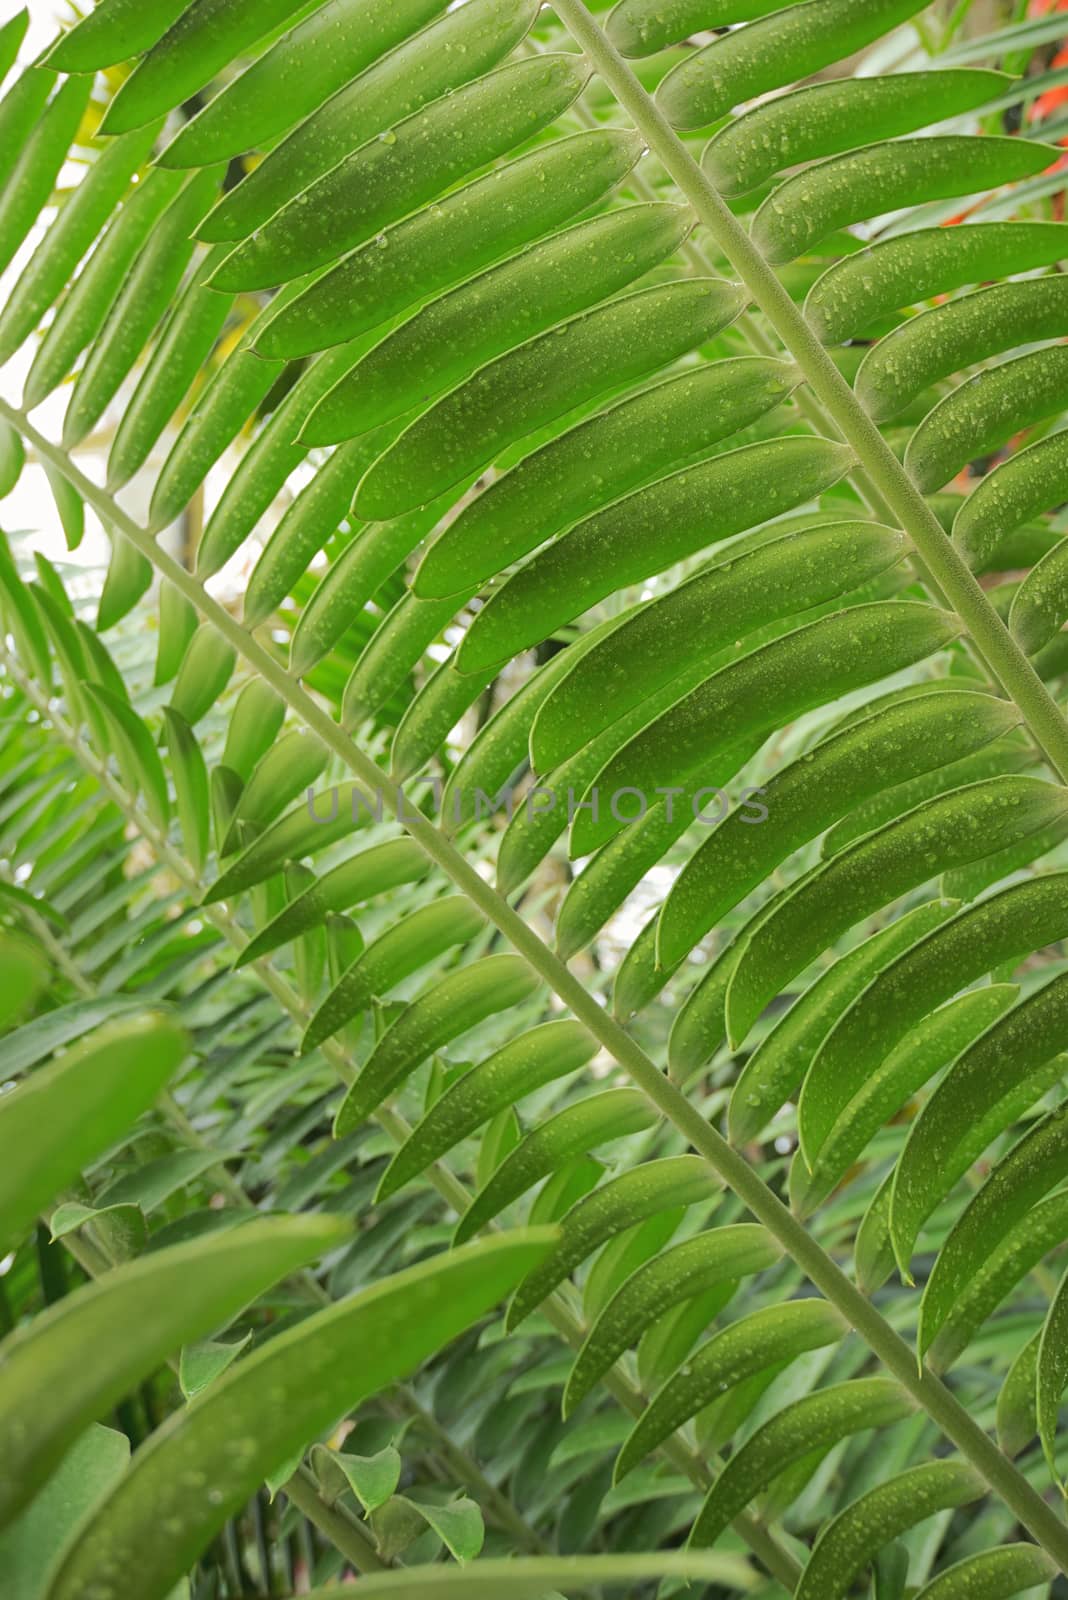 Tropical leaves details and dew drops